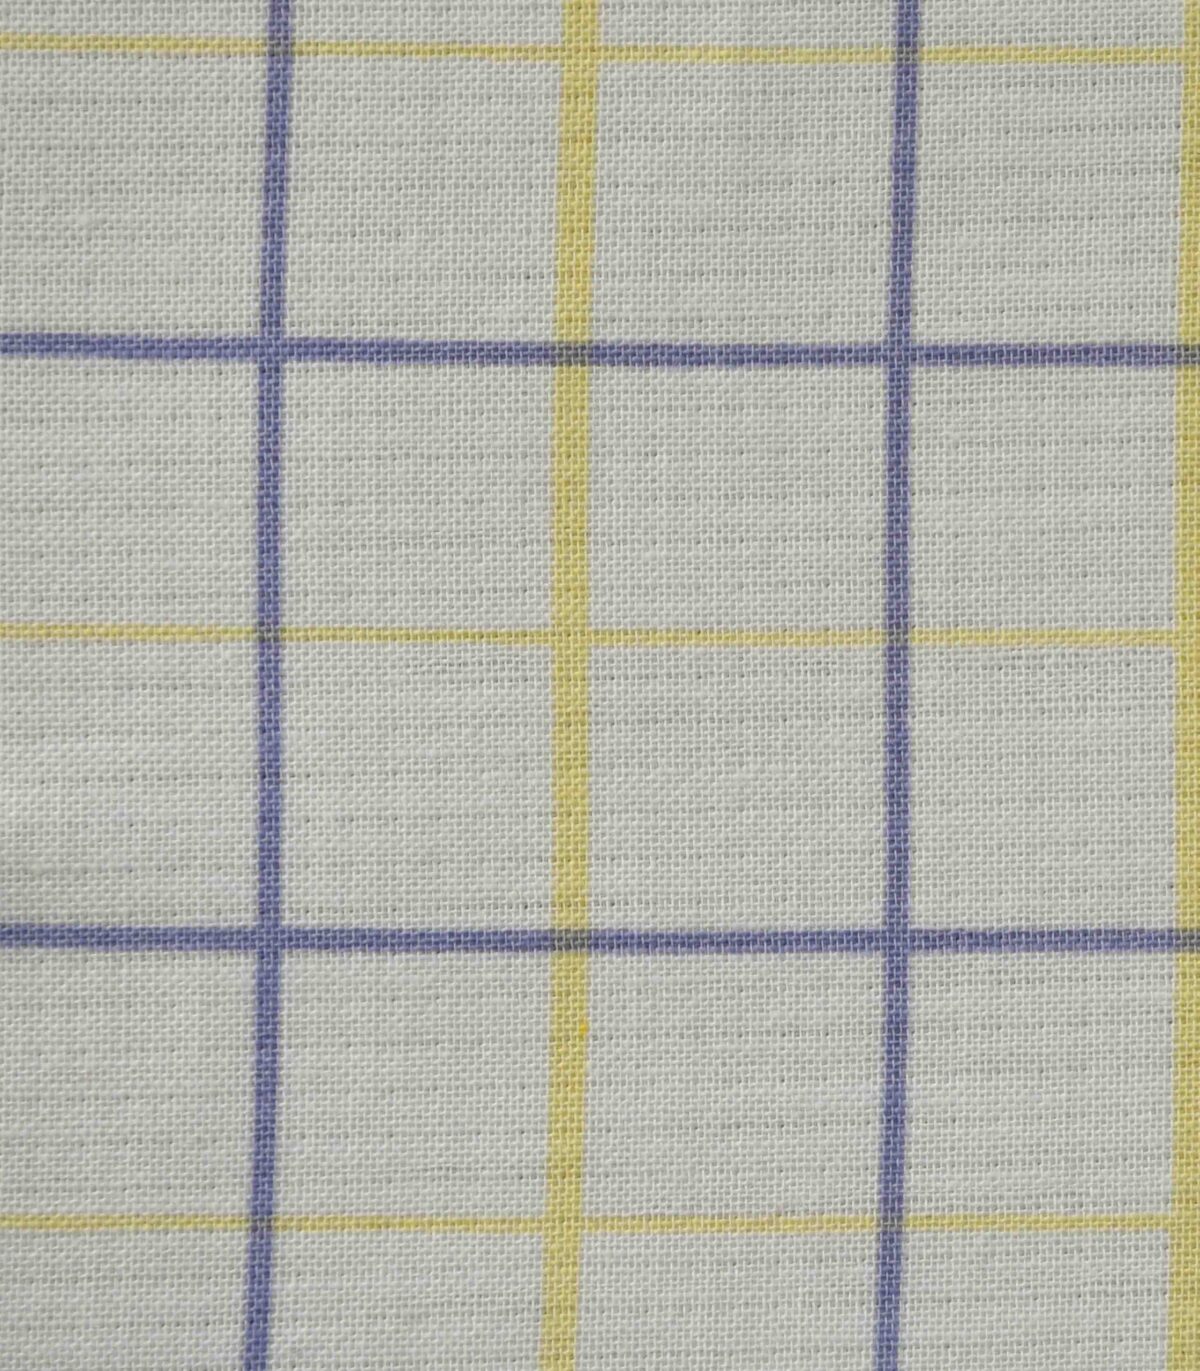 Cotton Double Cloth Checked Print Fabric